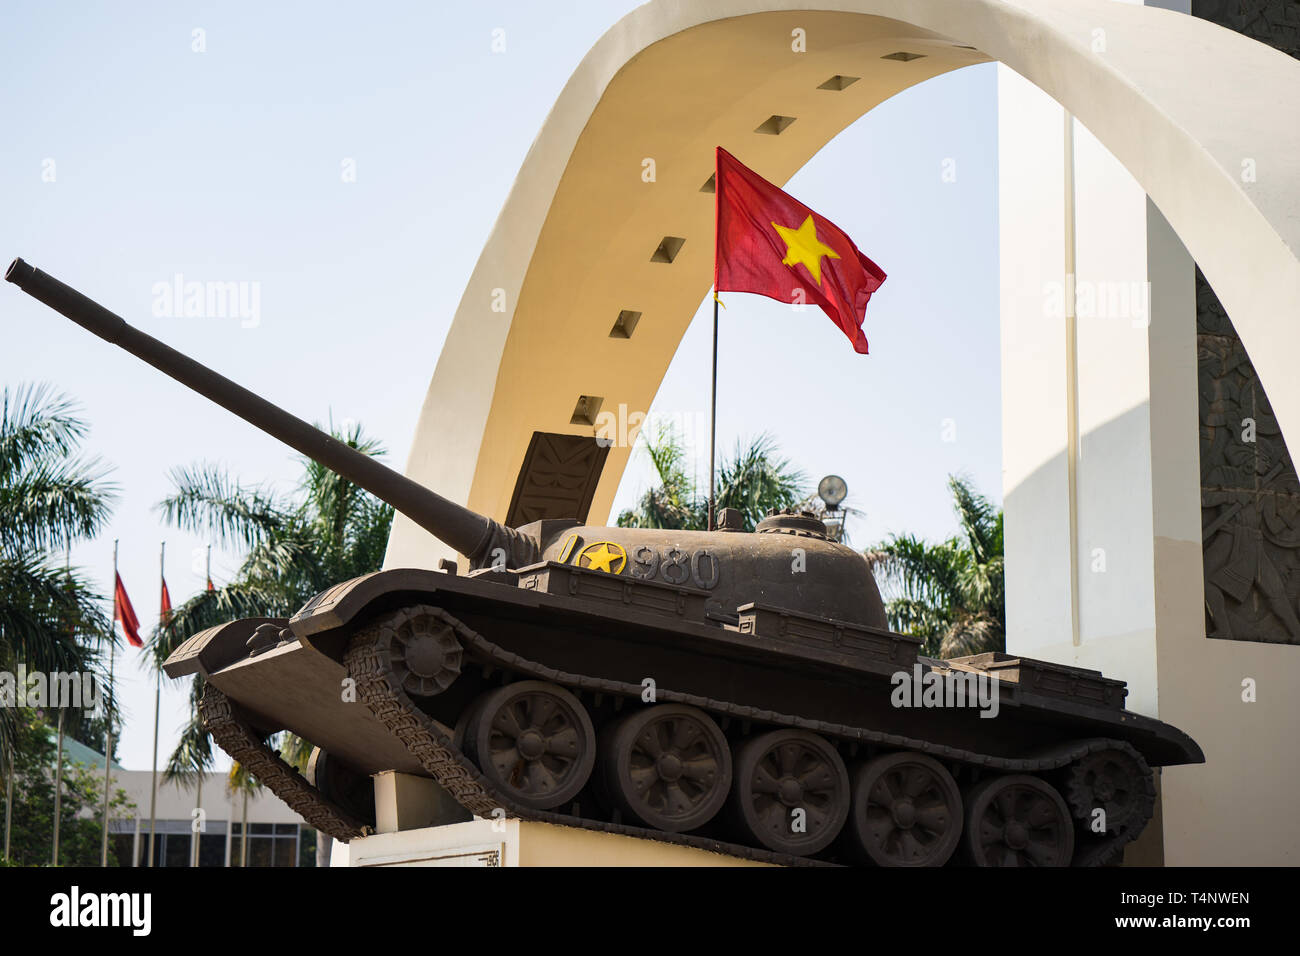 Buon Ma Thuot, Vietnam - Mar 30, 2016: Victory monument of a T-54 Tank in central point of city, crossroads of 6 roads to discover the Buon Ma Thuot c Stock Photo